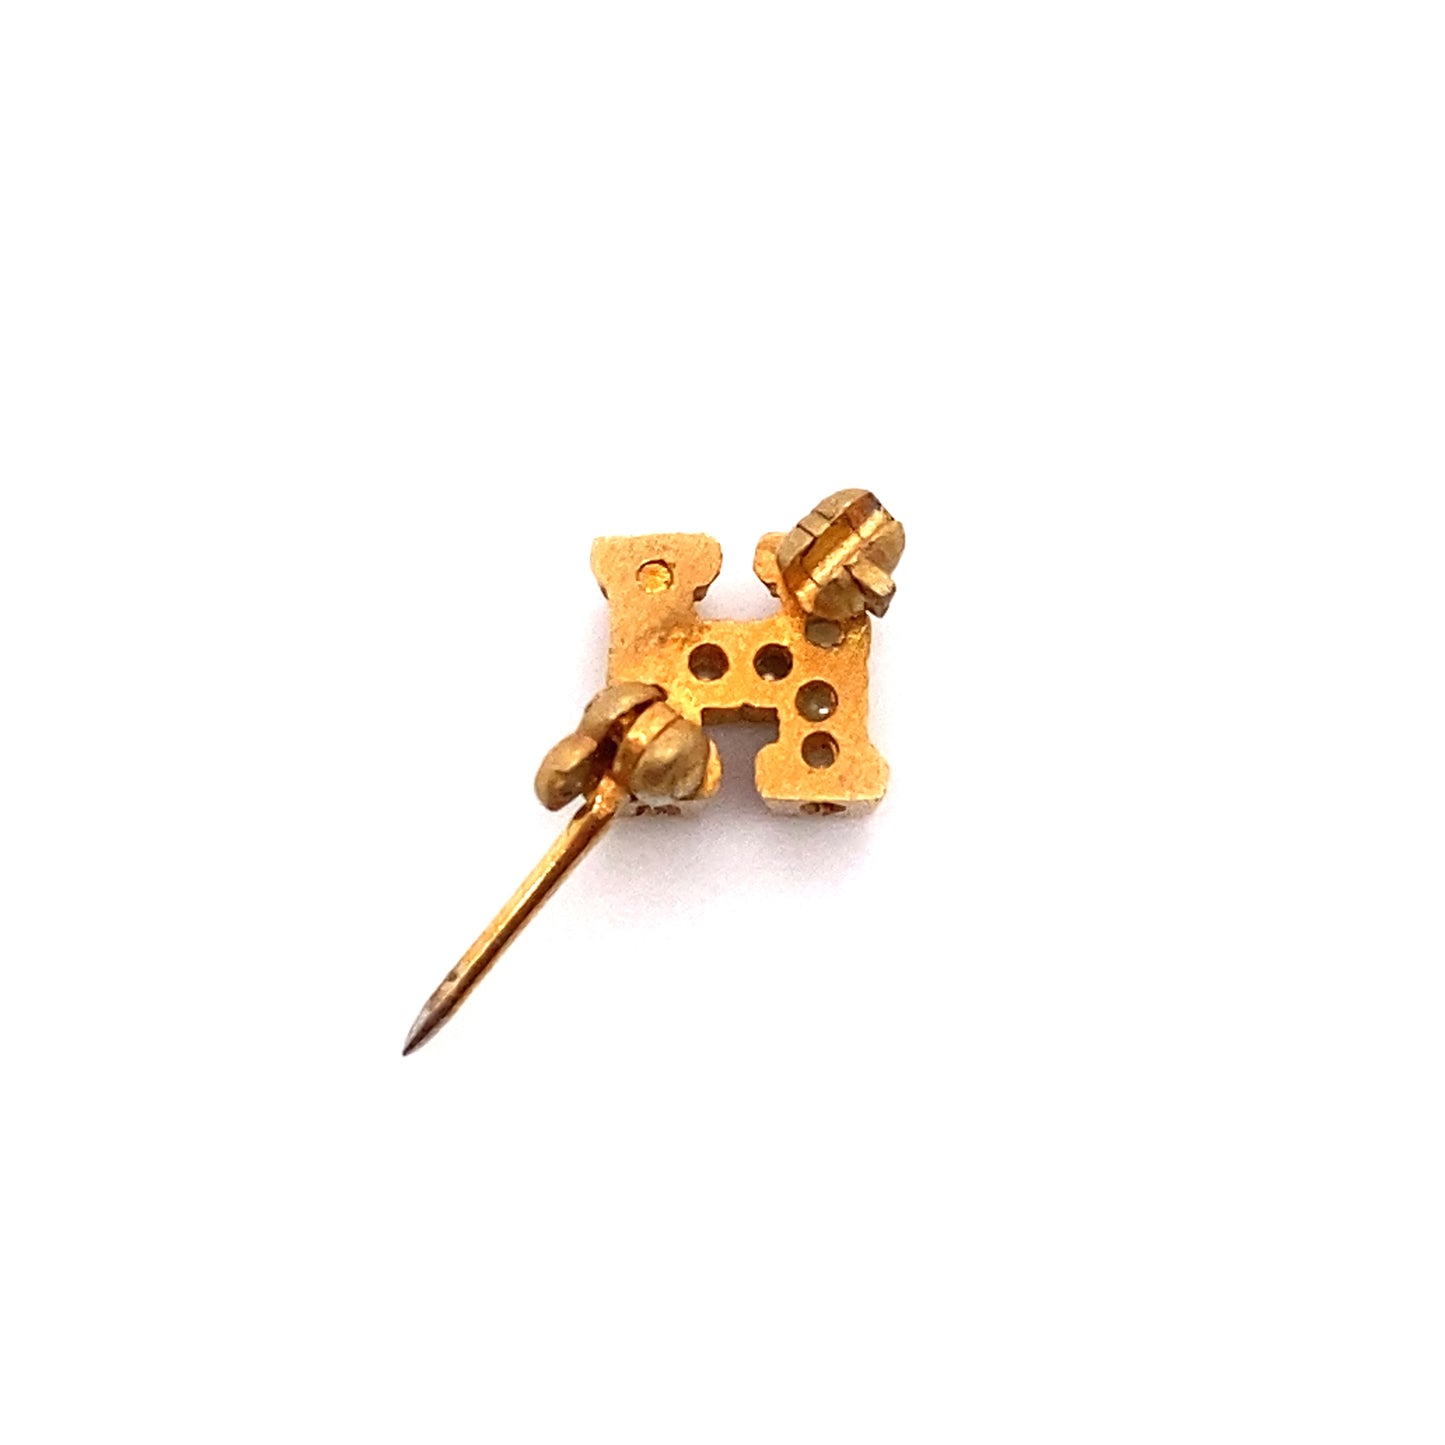 Circa 1920s Initial H Micro Pin with Seed Pearls in 14K Gold